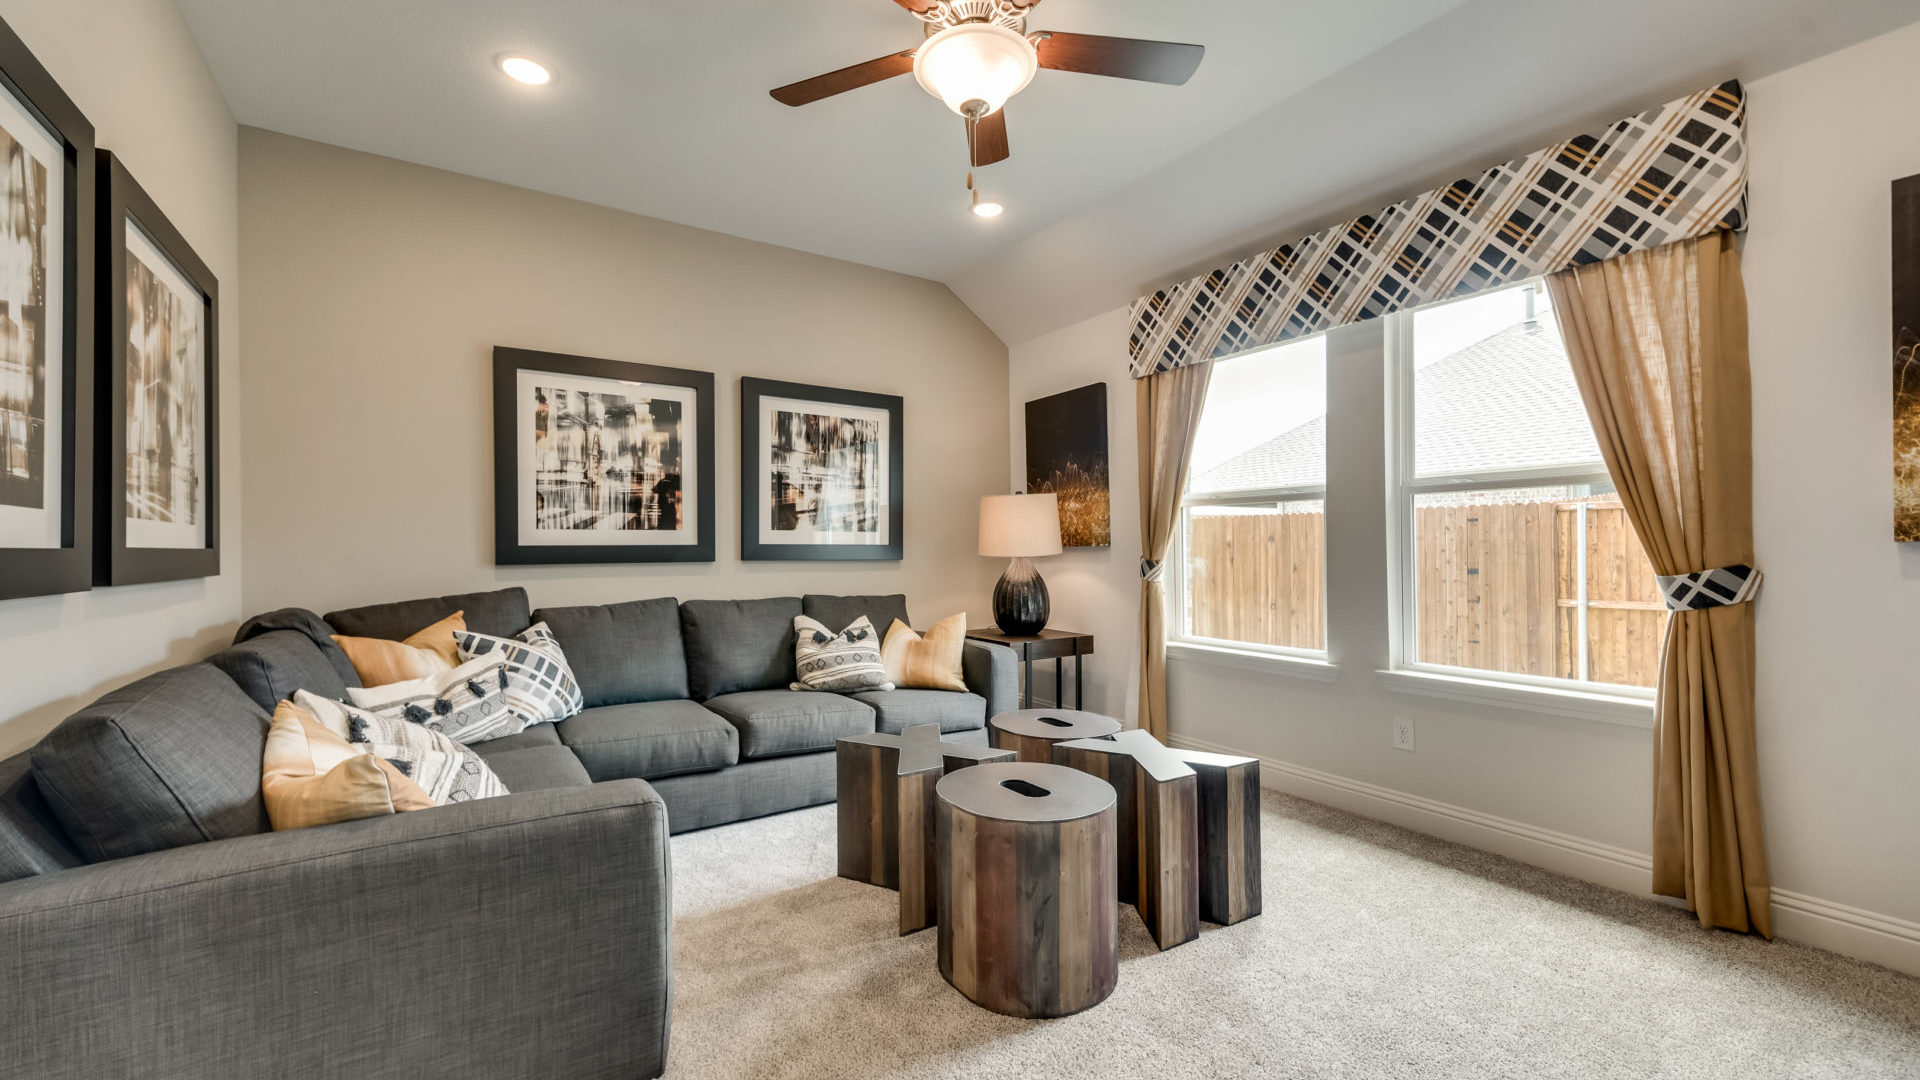 Woodland Creek new homes in Royse City, TX